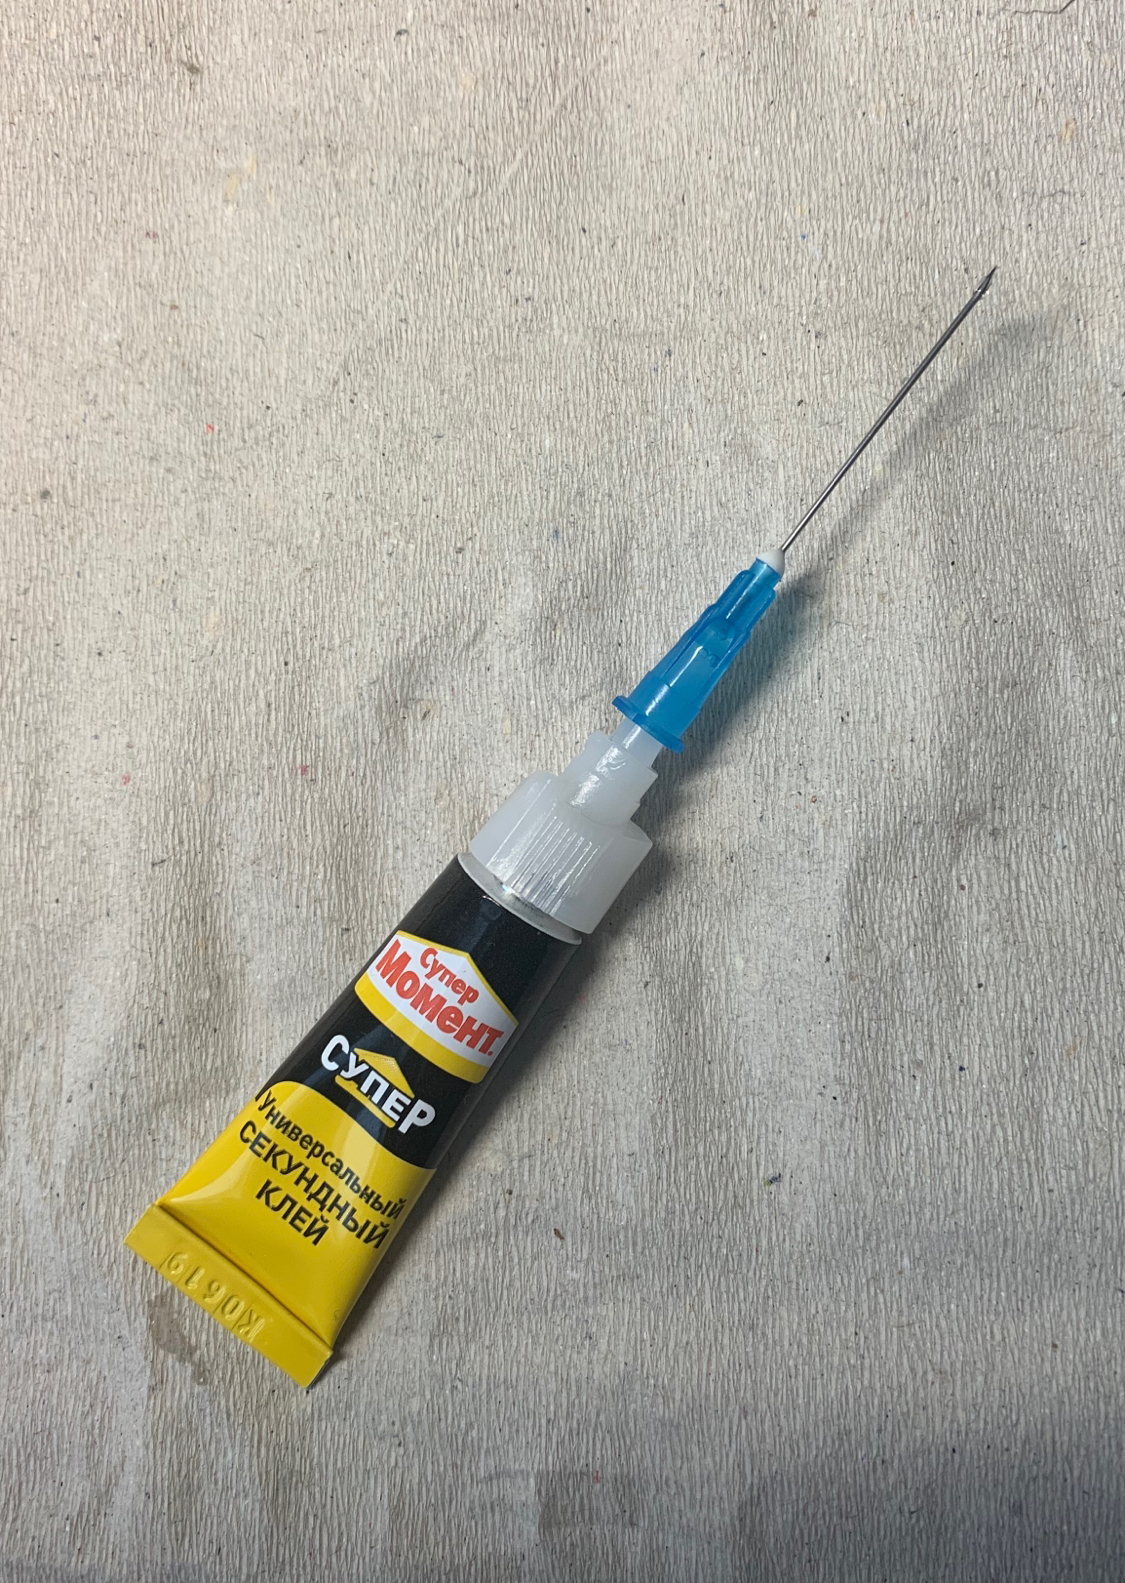 For small parts - My, Life hack, Super glue